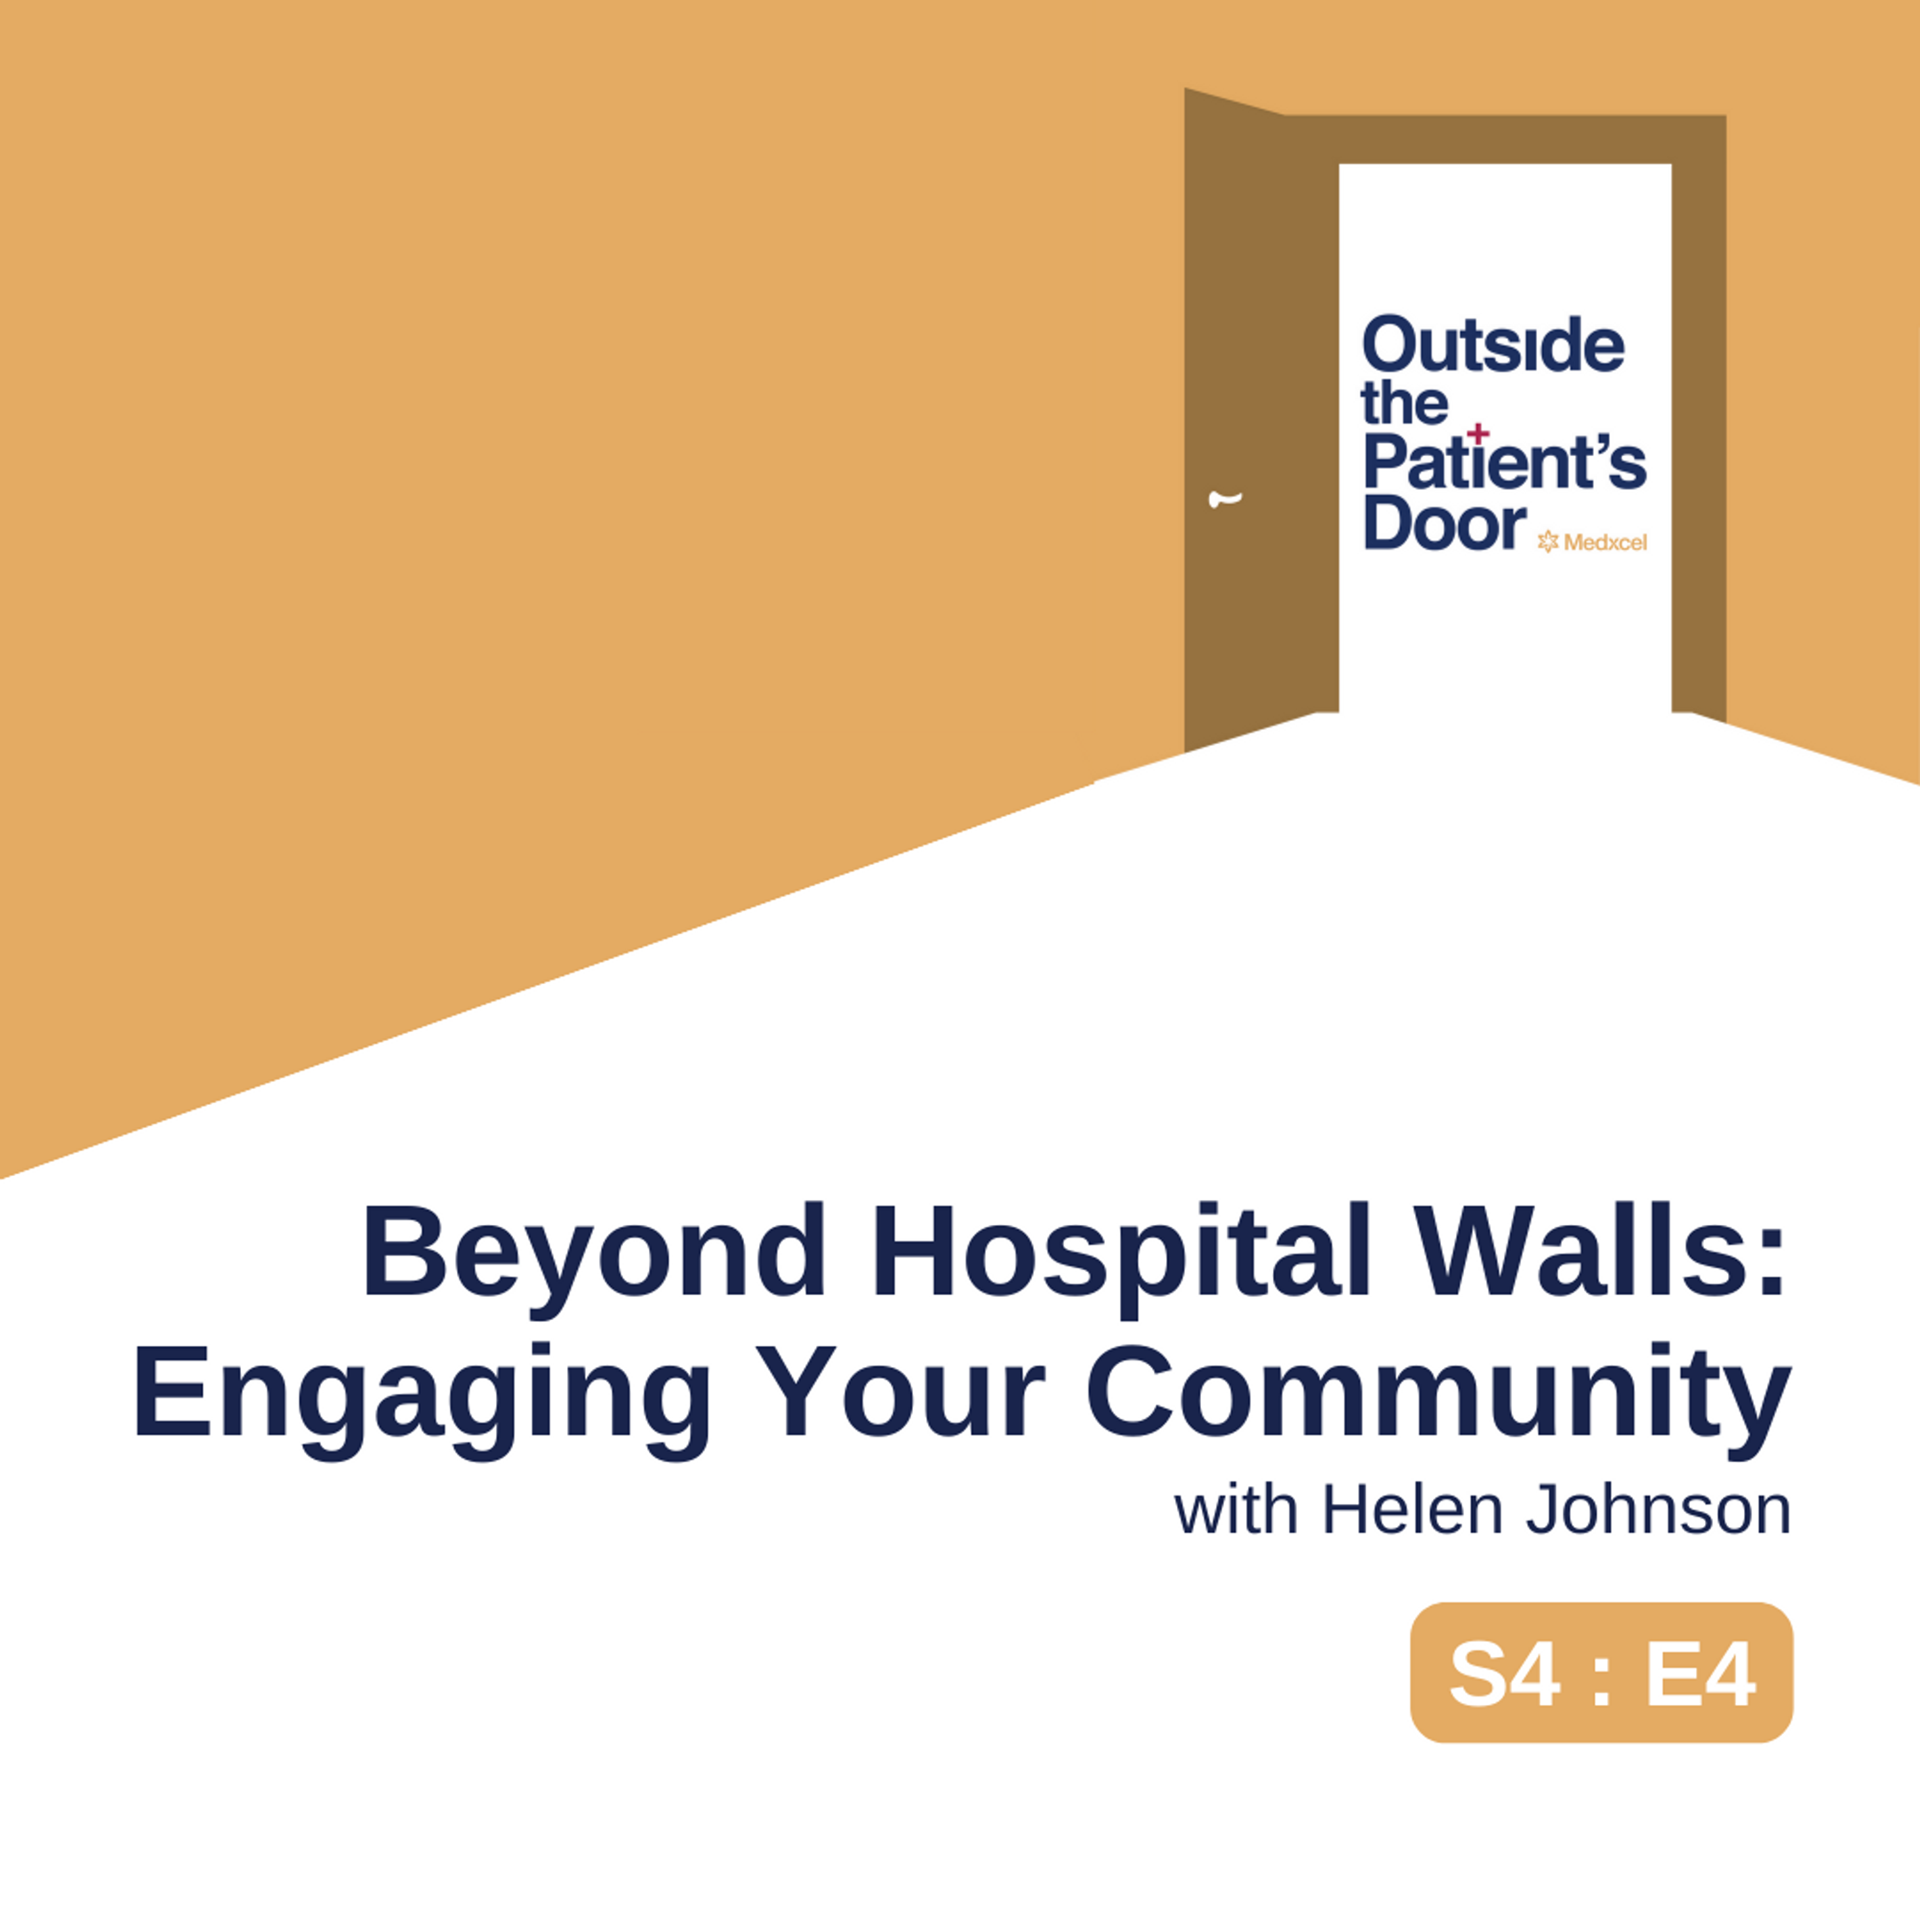 S4 E4: Beyond Hospital Walls: Engaging Your Community with Helen Johnson